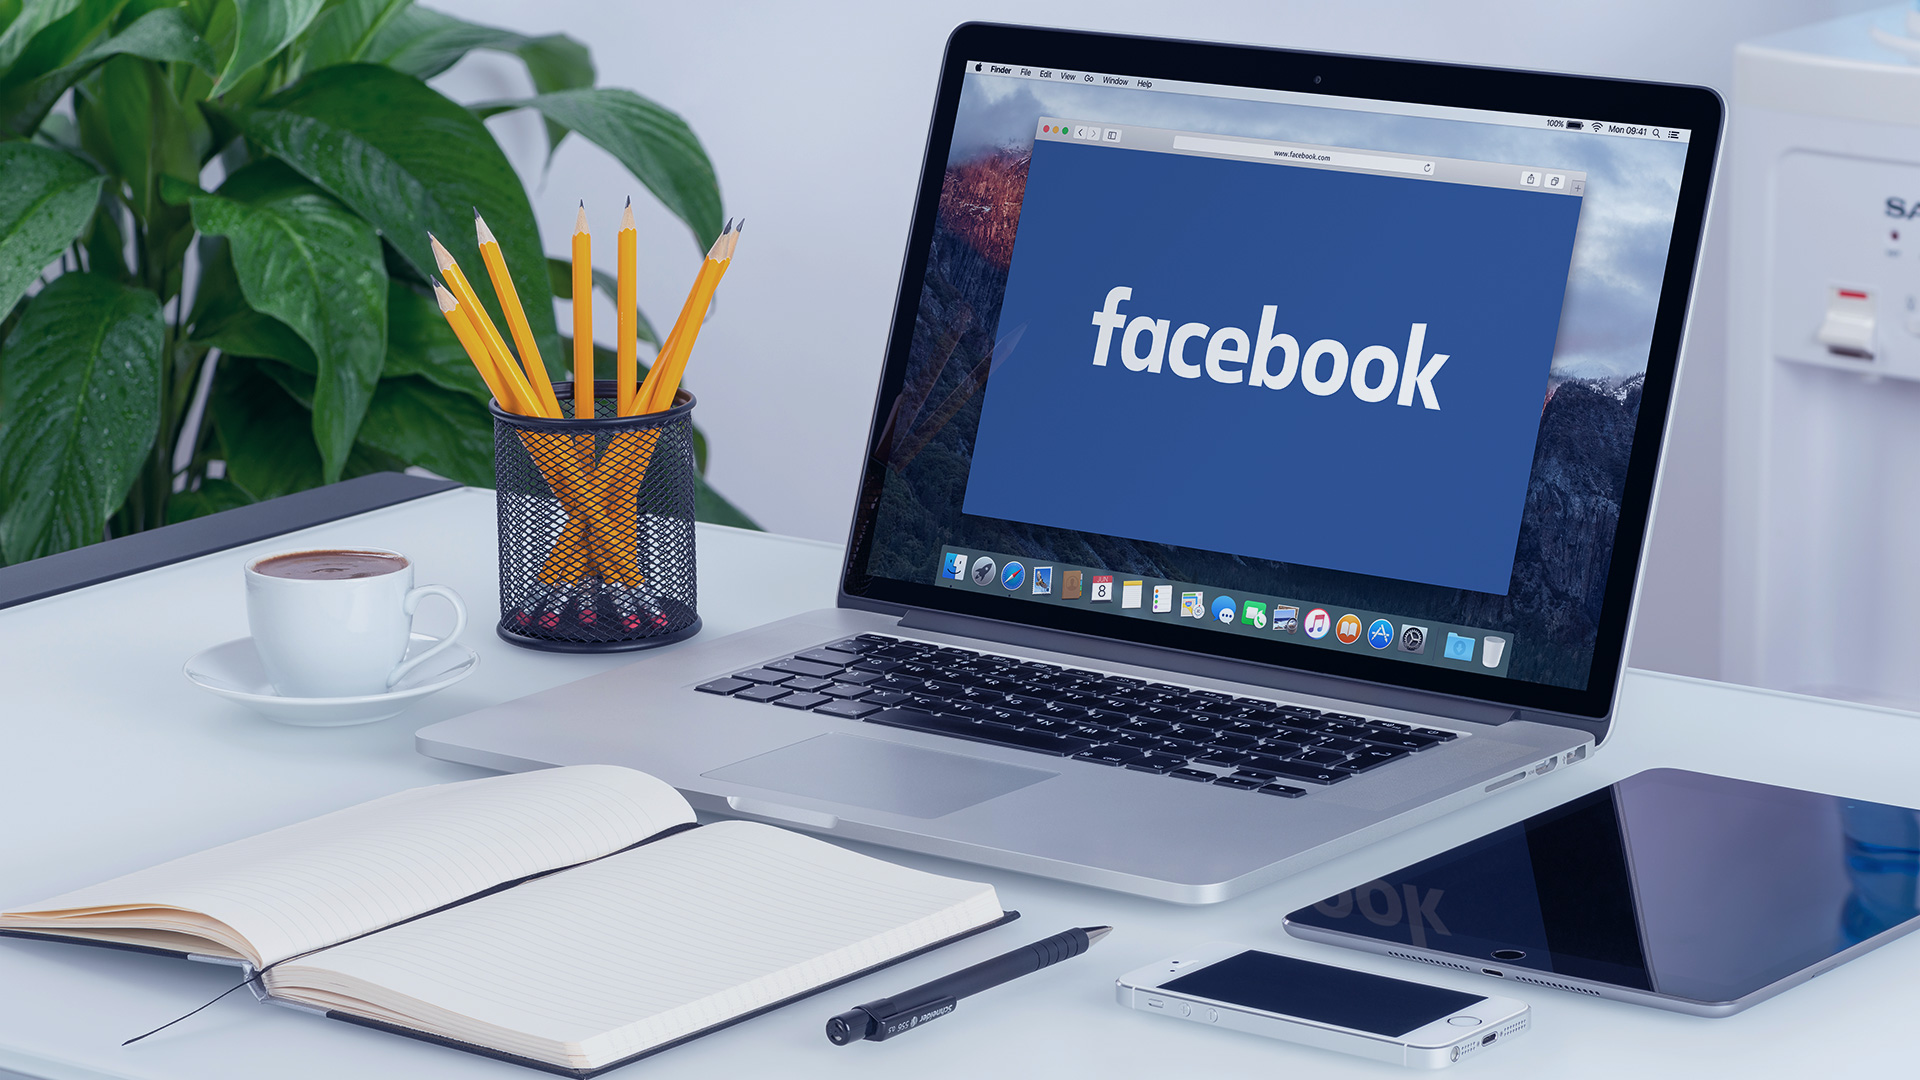 How to Promote Your Small Business on Facebook